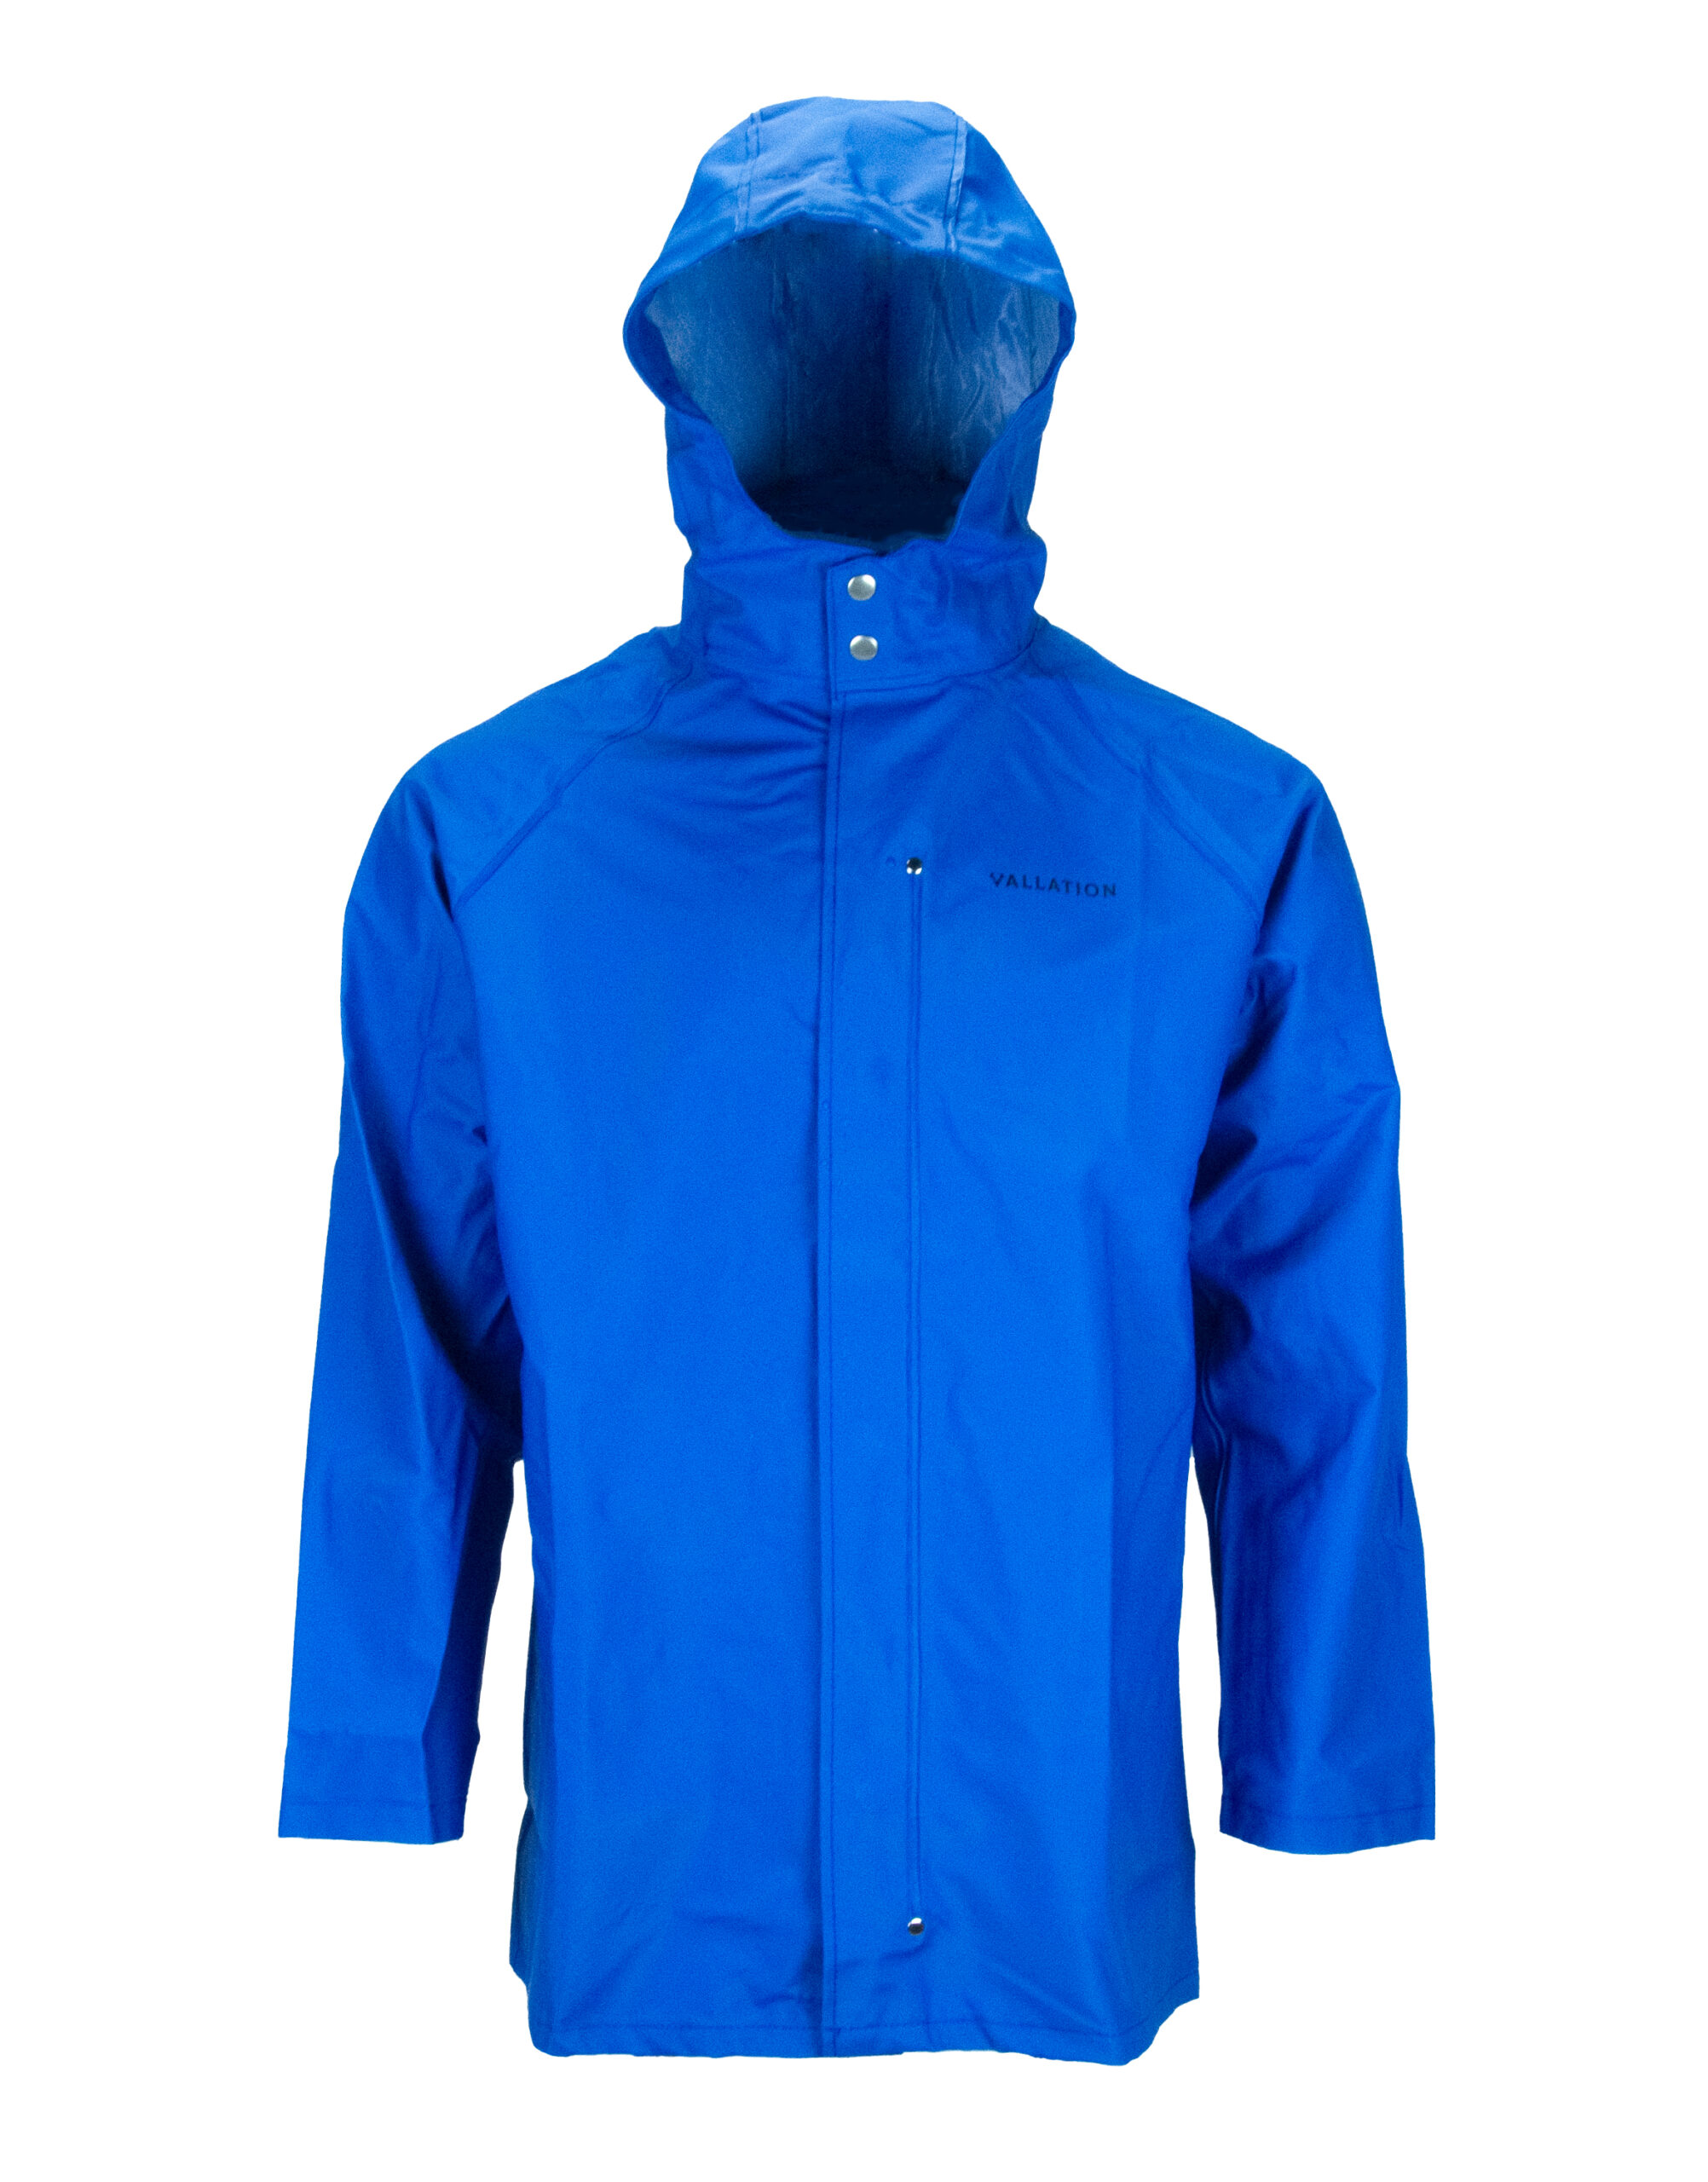 Pacific AP Onshore Jacket - Vallation Outerwear